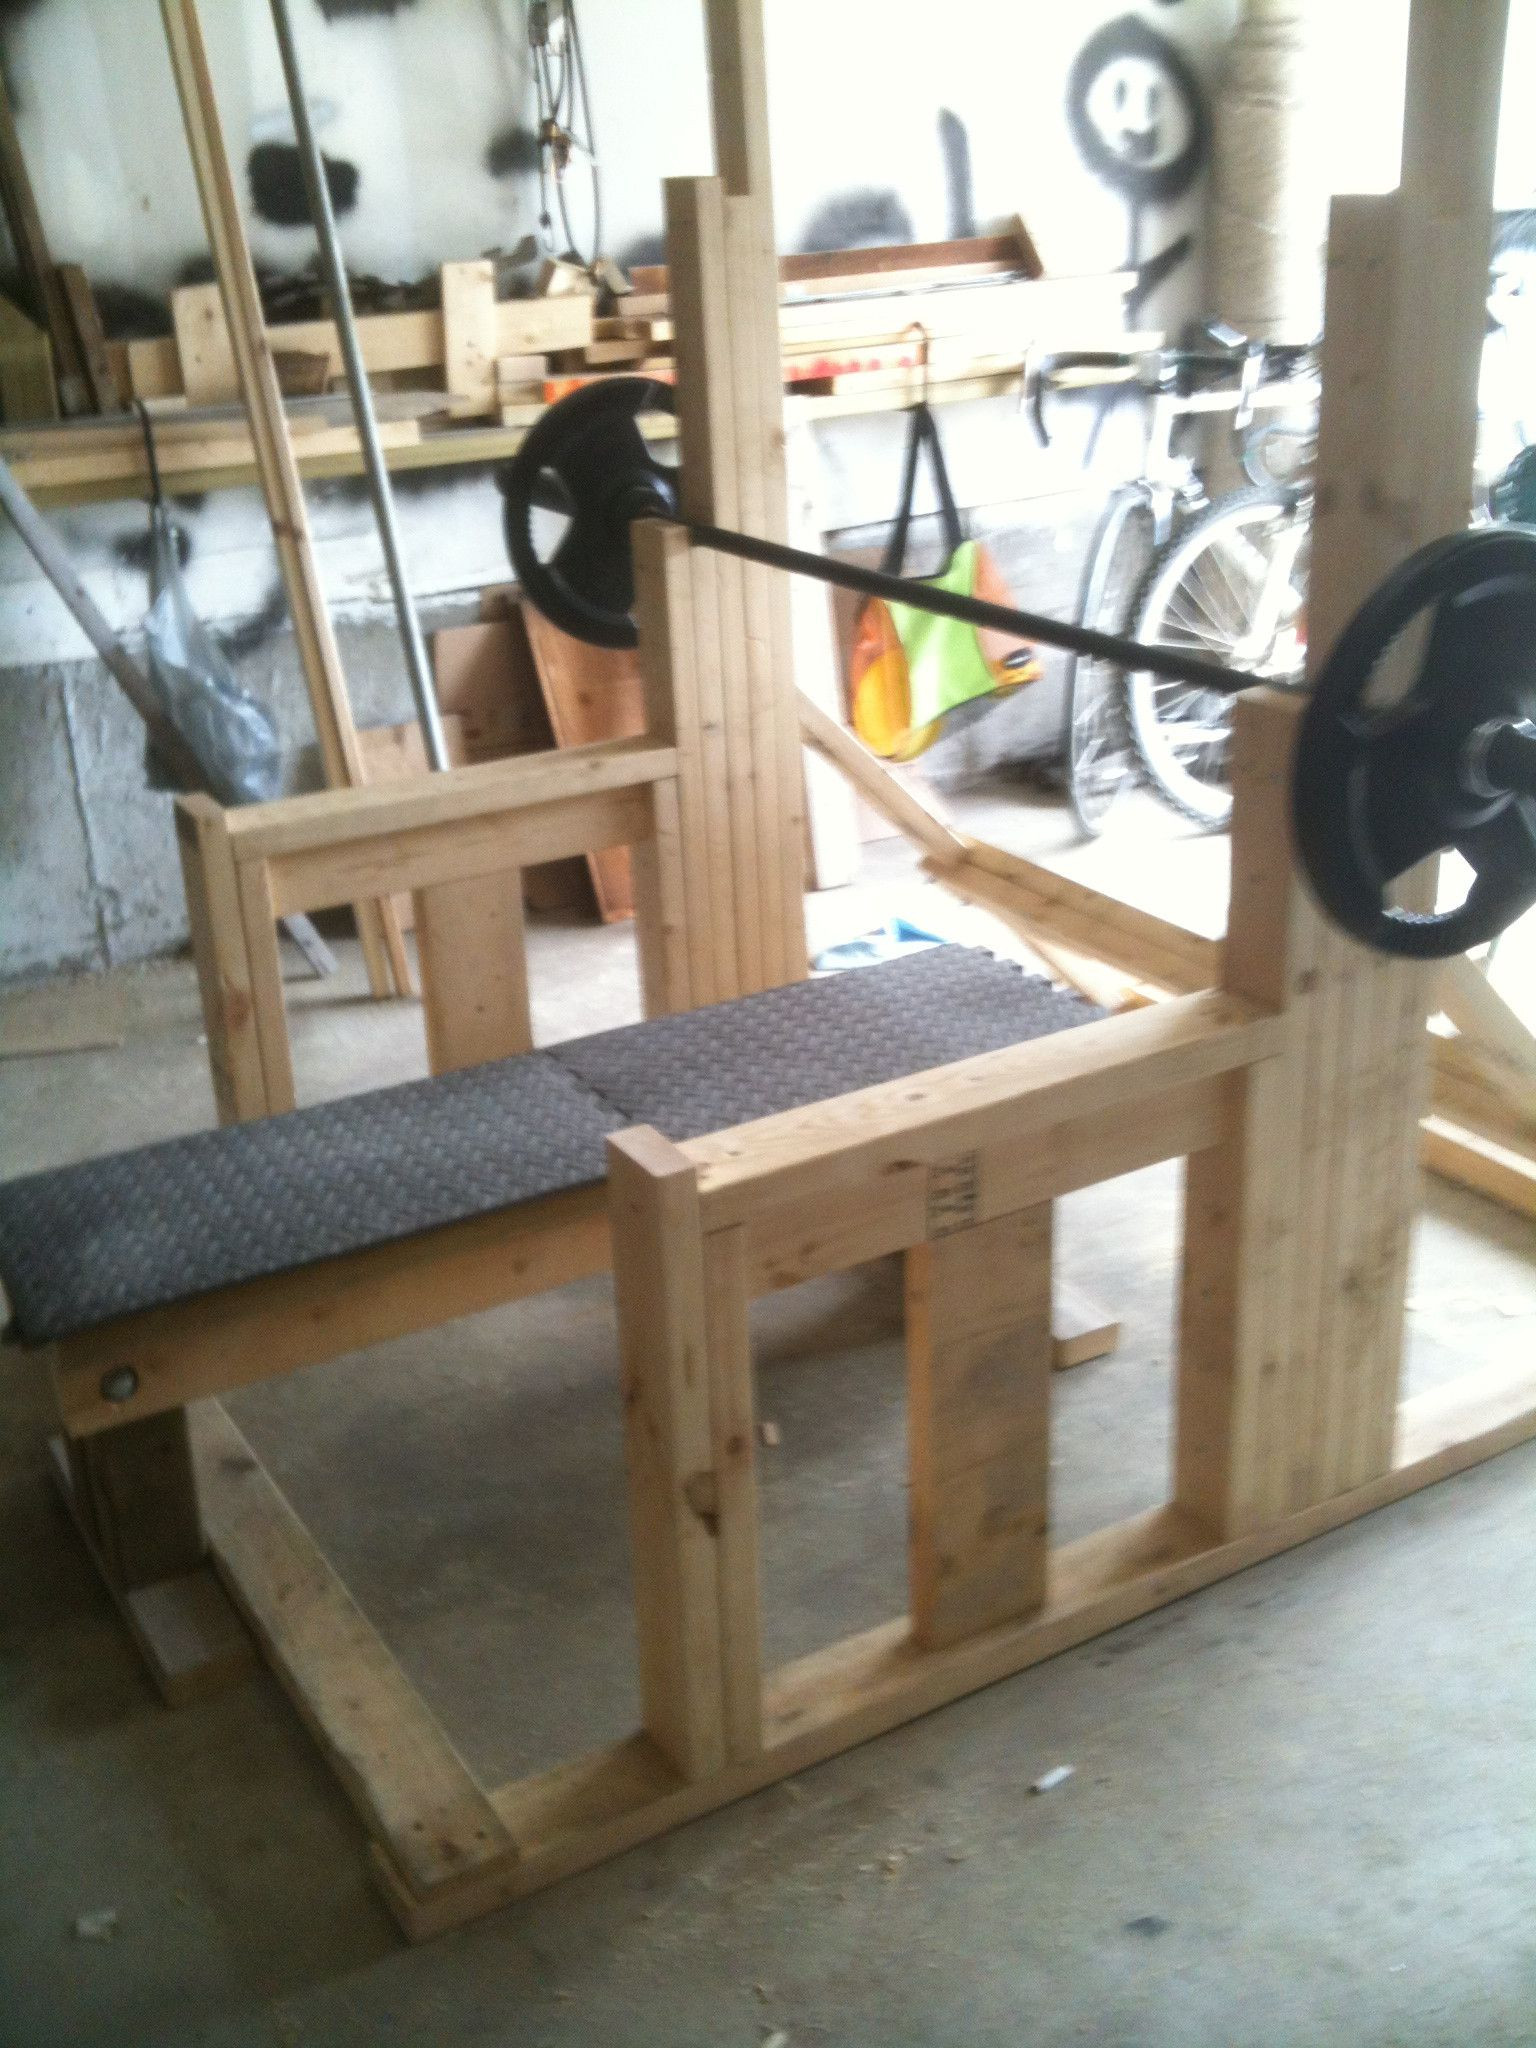 DIY Bench Press Rack
 The most awesome images on the Internet